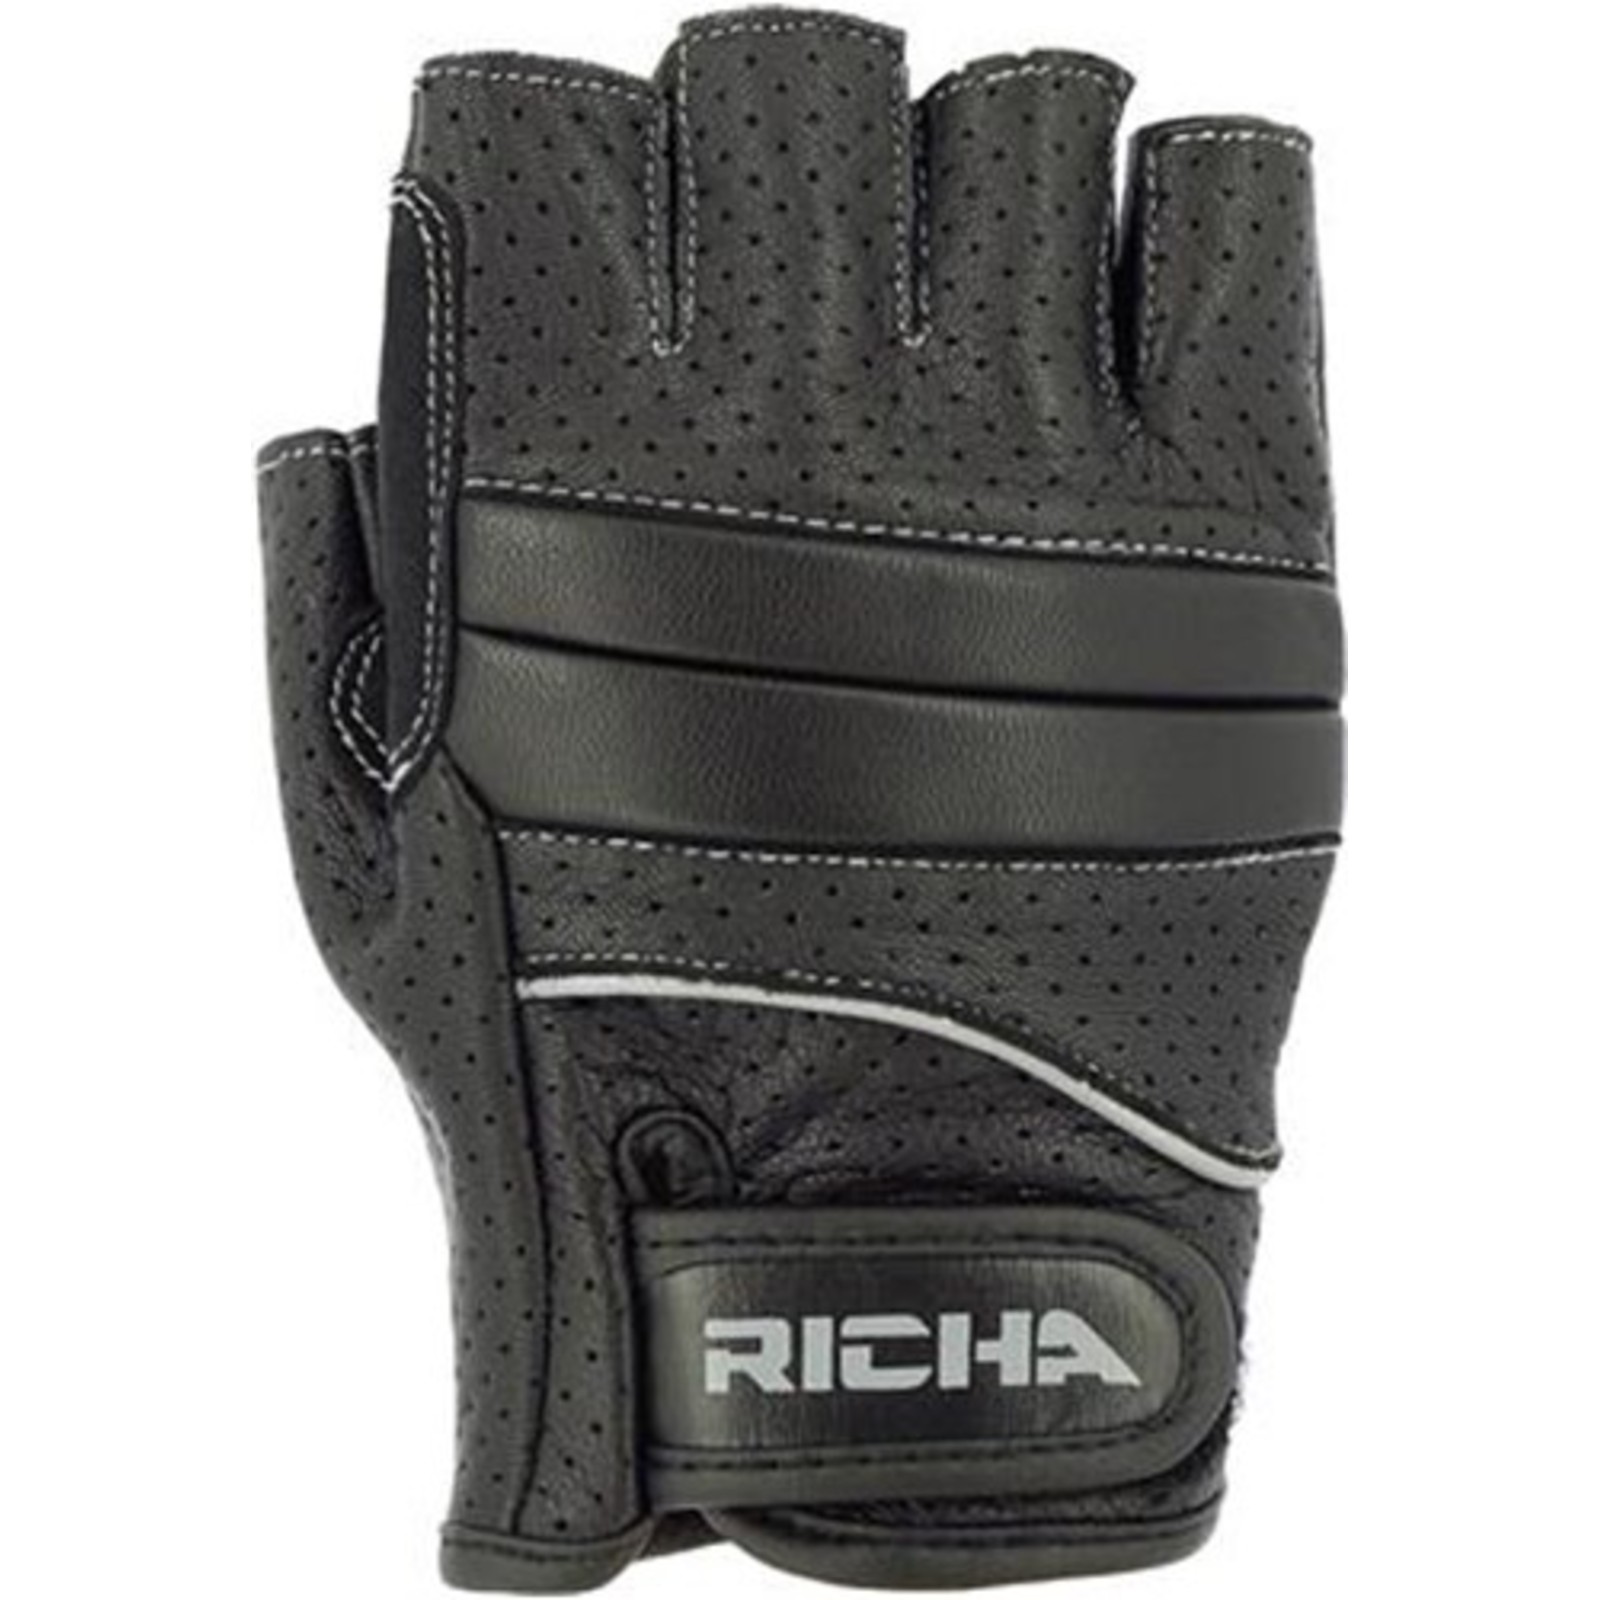 Richa clothing - leather for motorcyclists